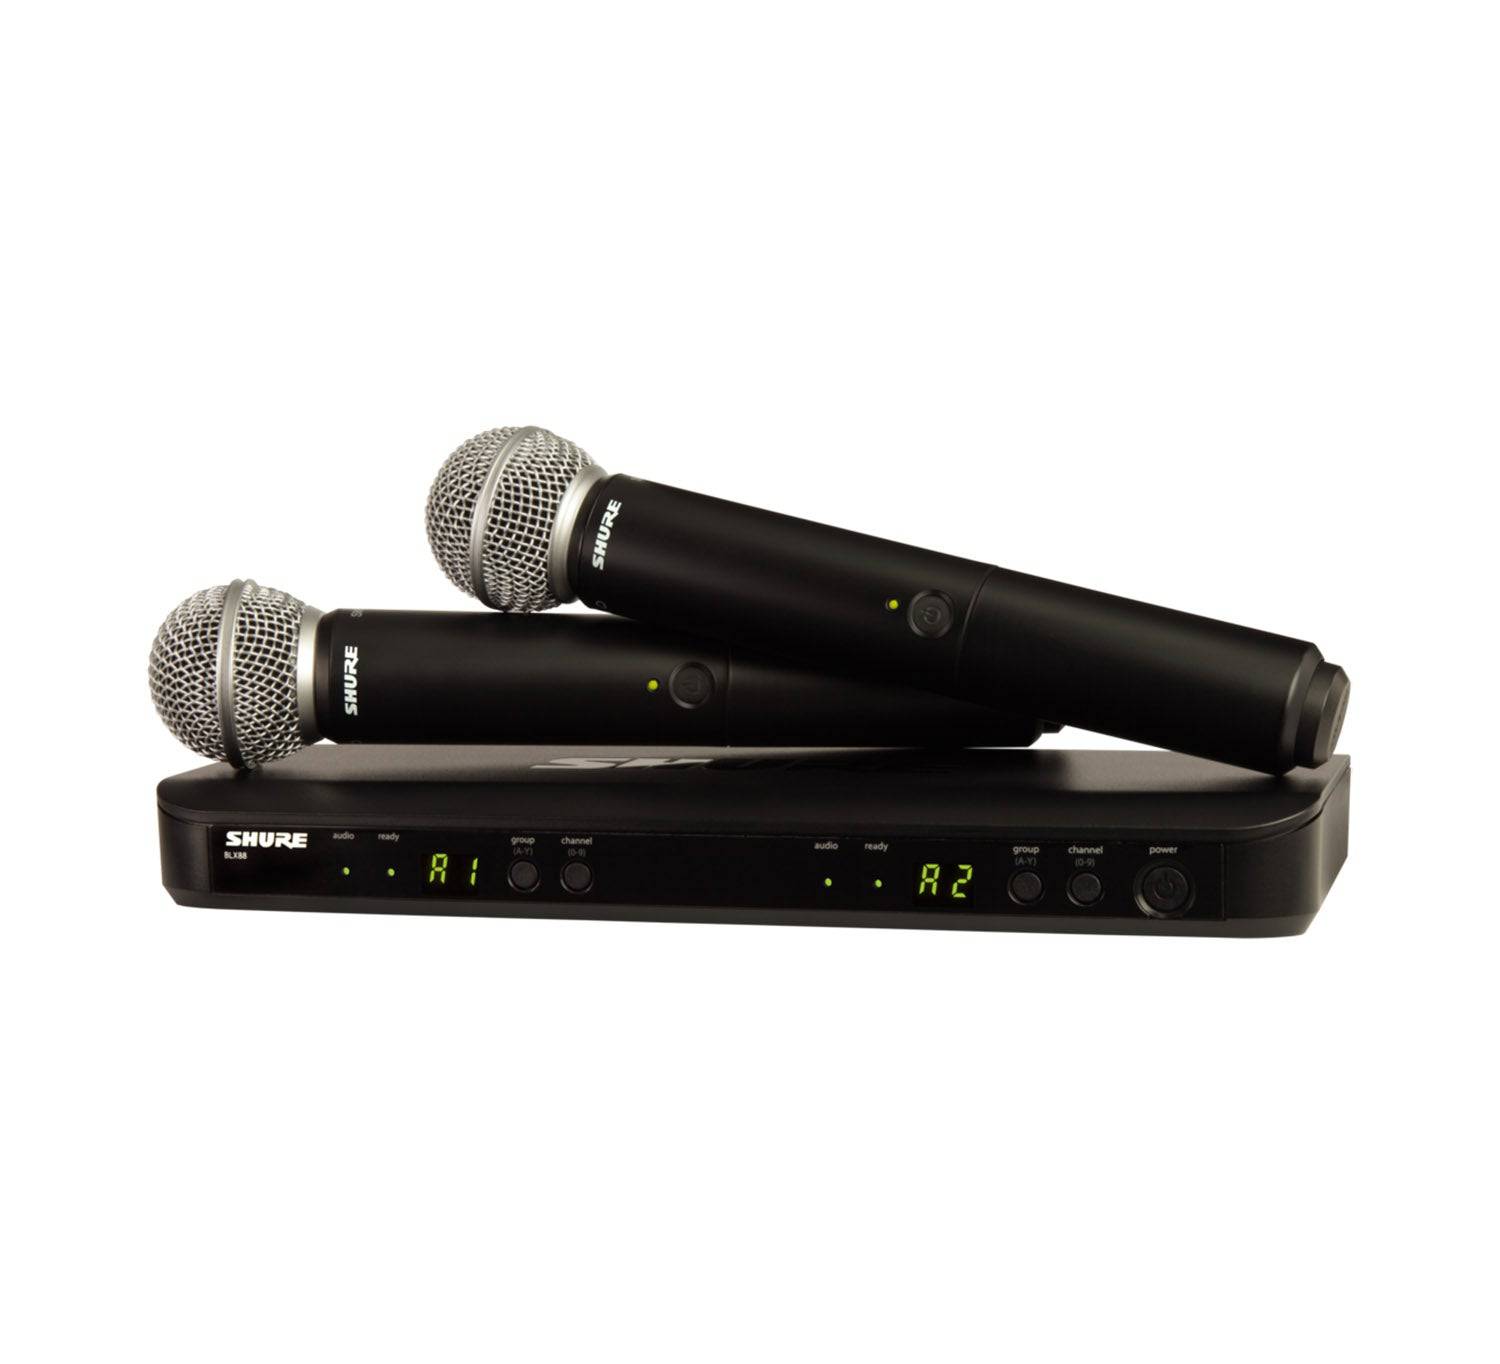 Shure BLX288/PG58 Dual Handheld Wireless Microphones System with two PG58 Transmitters - Hollywood DJ